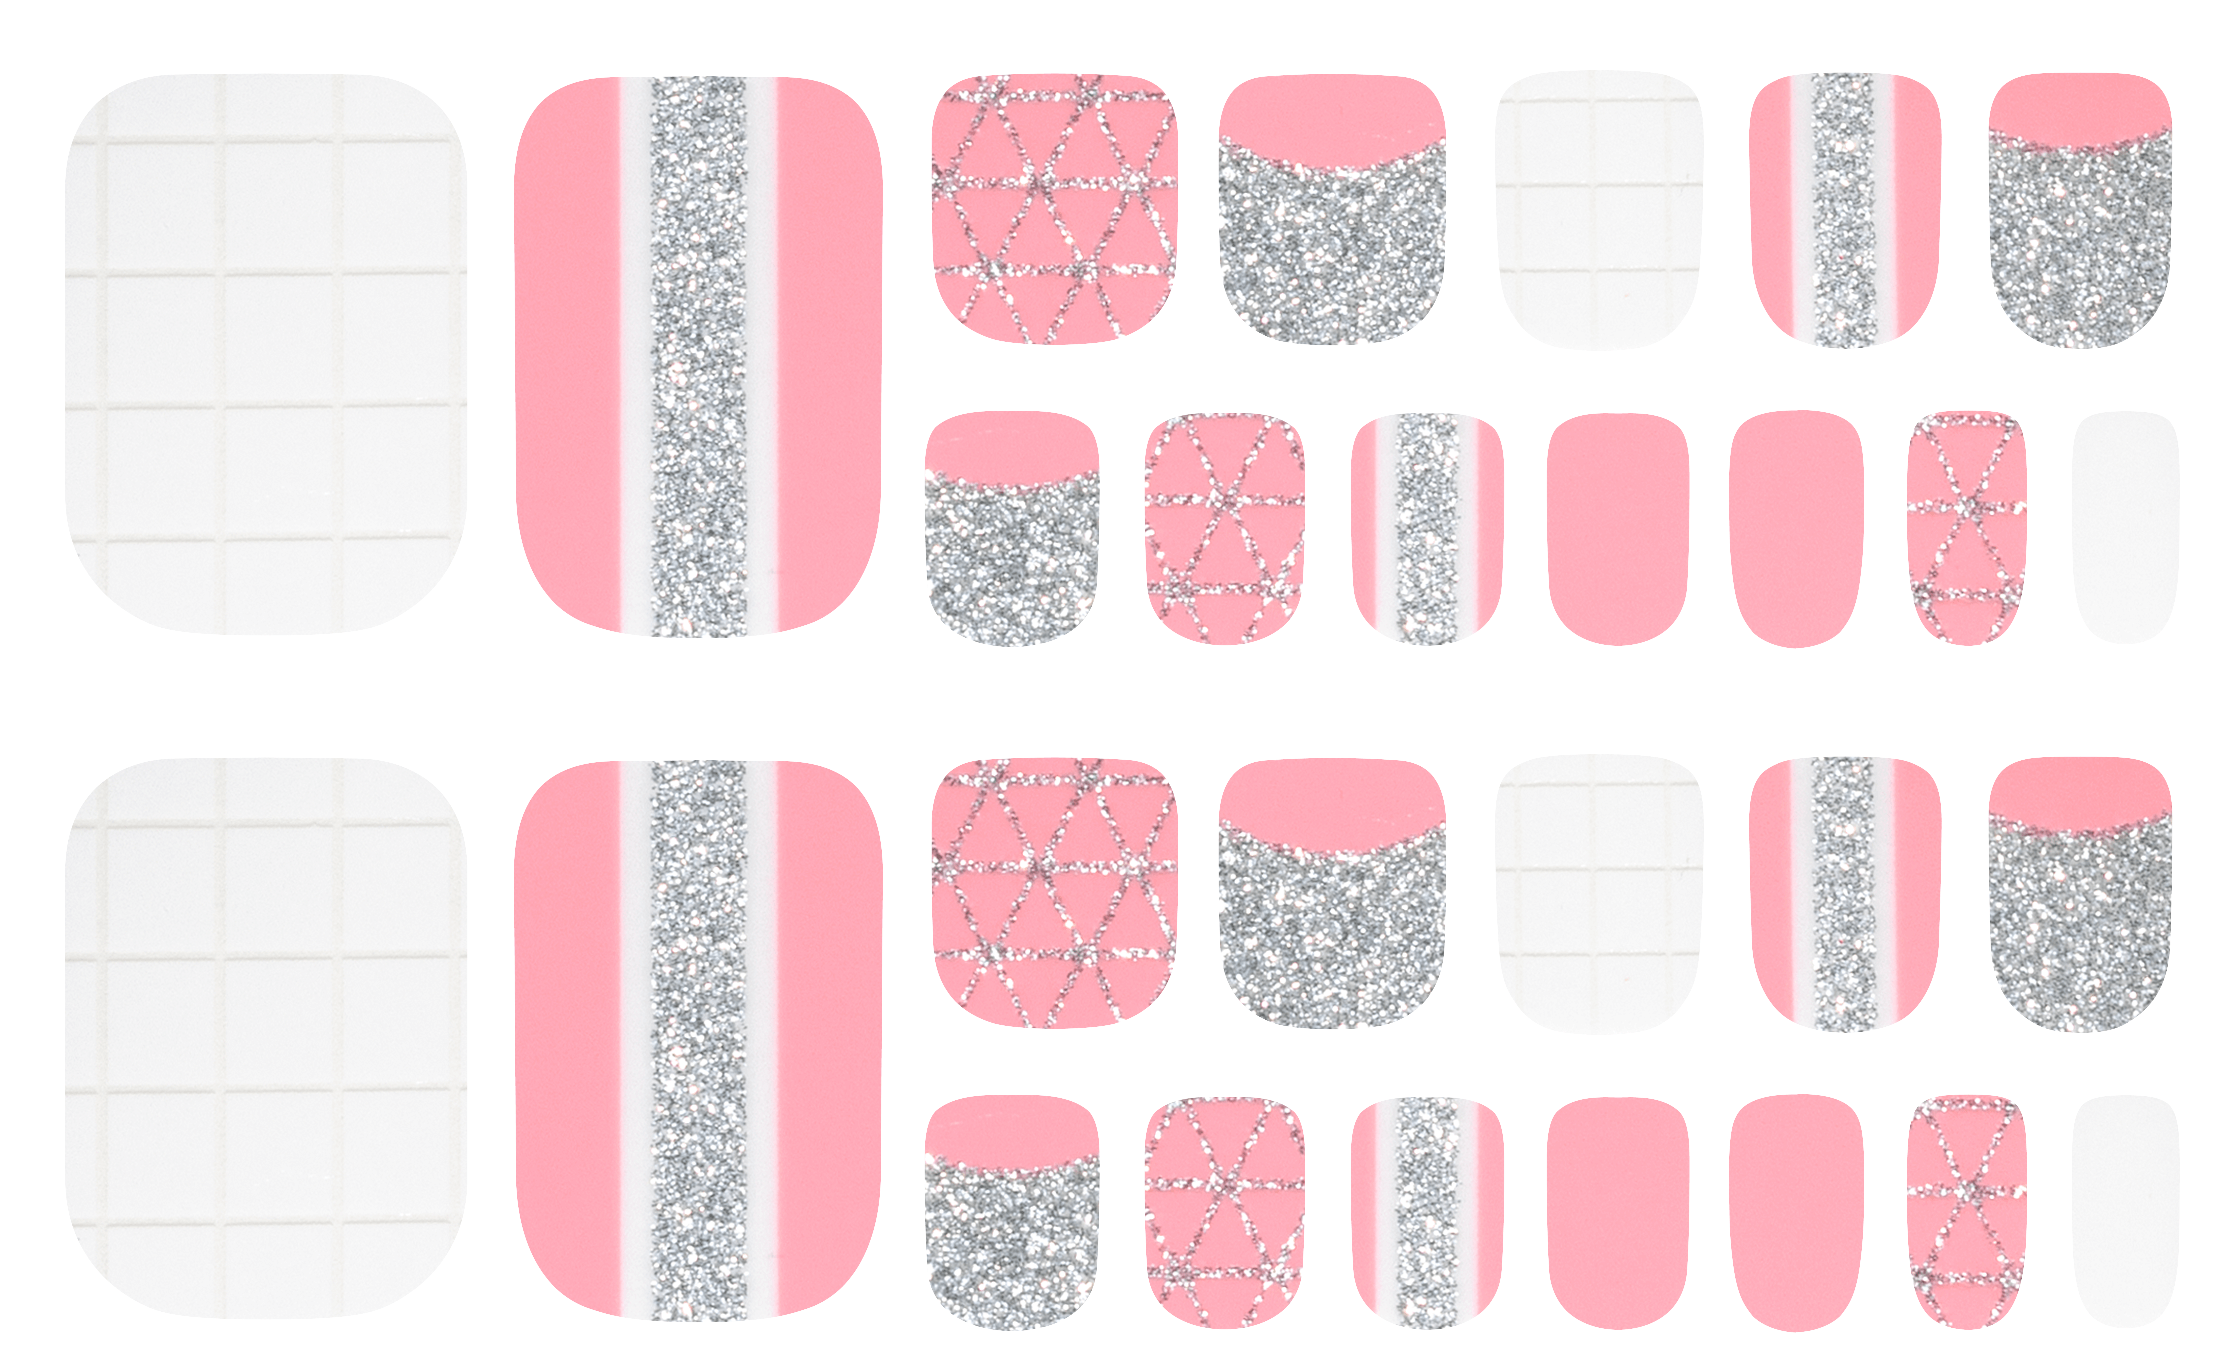 Light Me Up Nail Wraps Online Shop - Lily and Fox - Lily and Fox USA